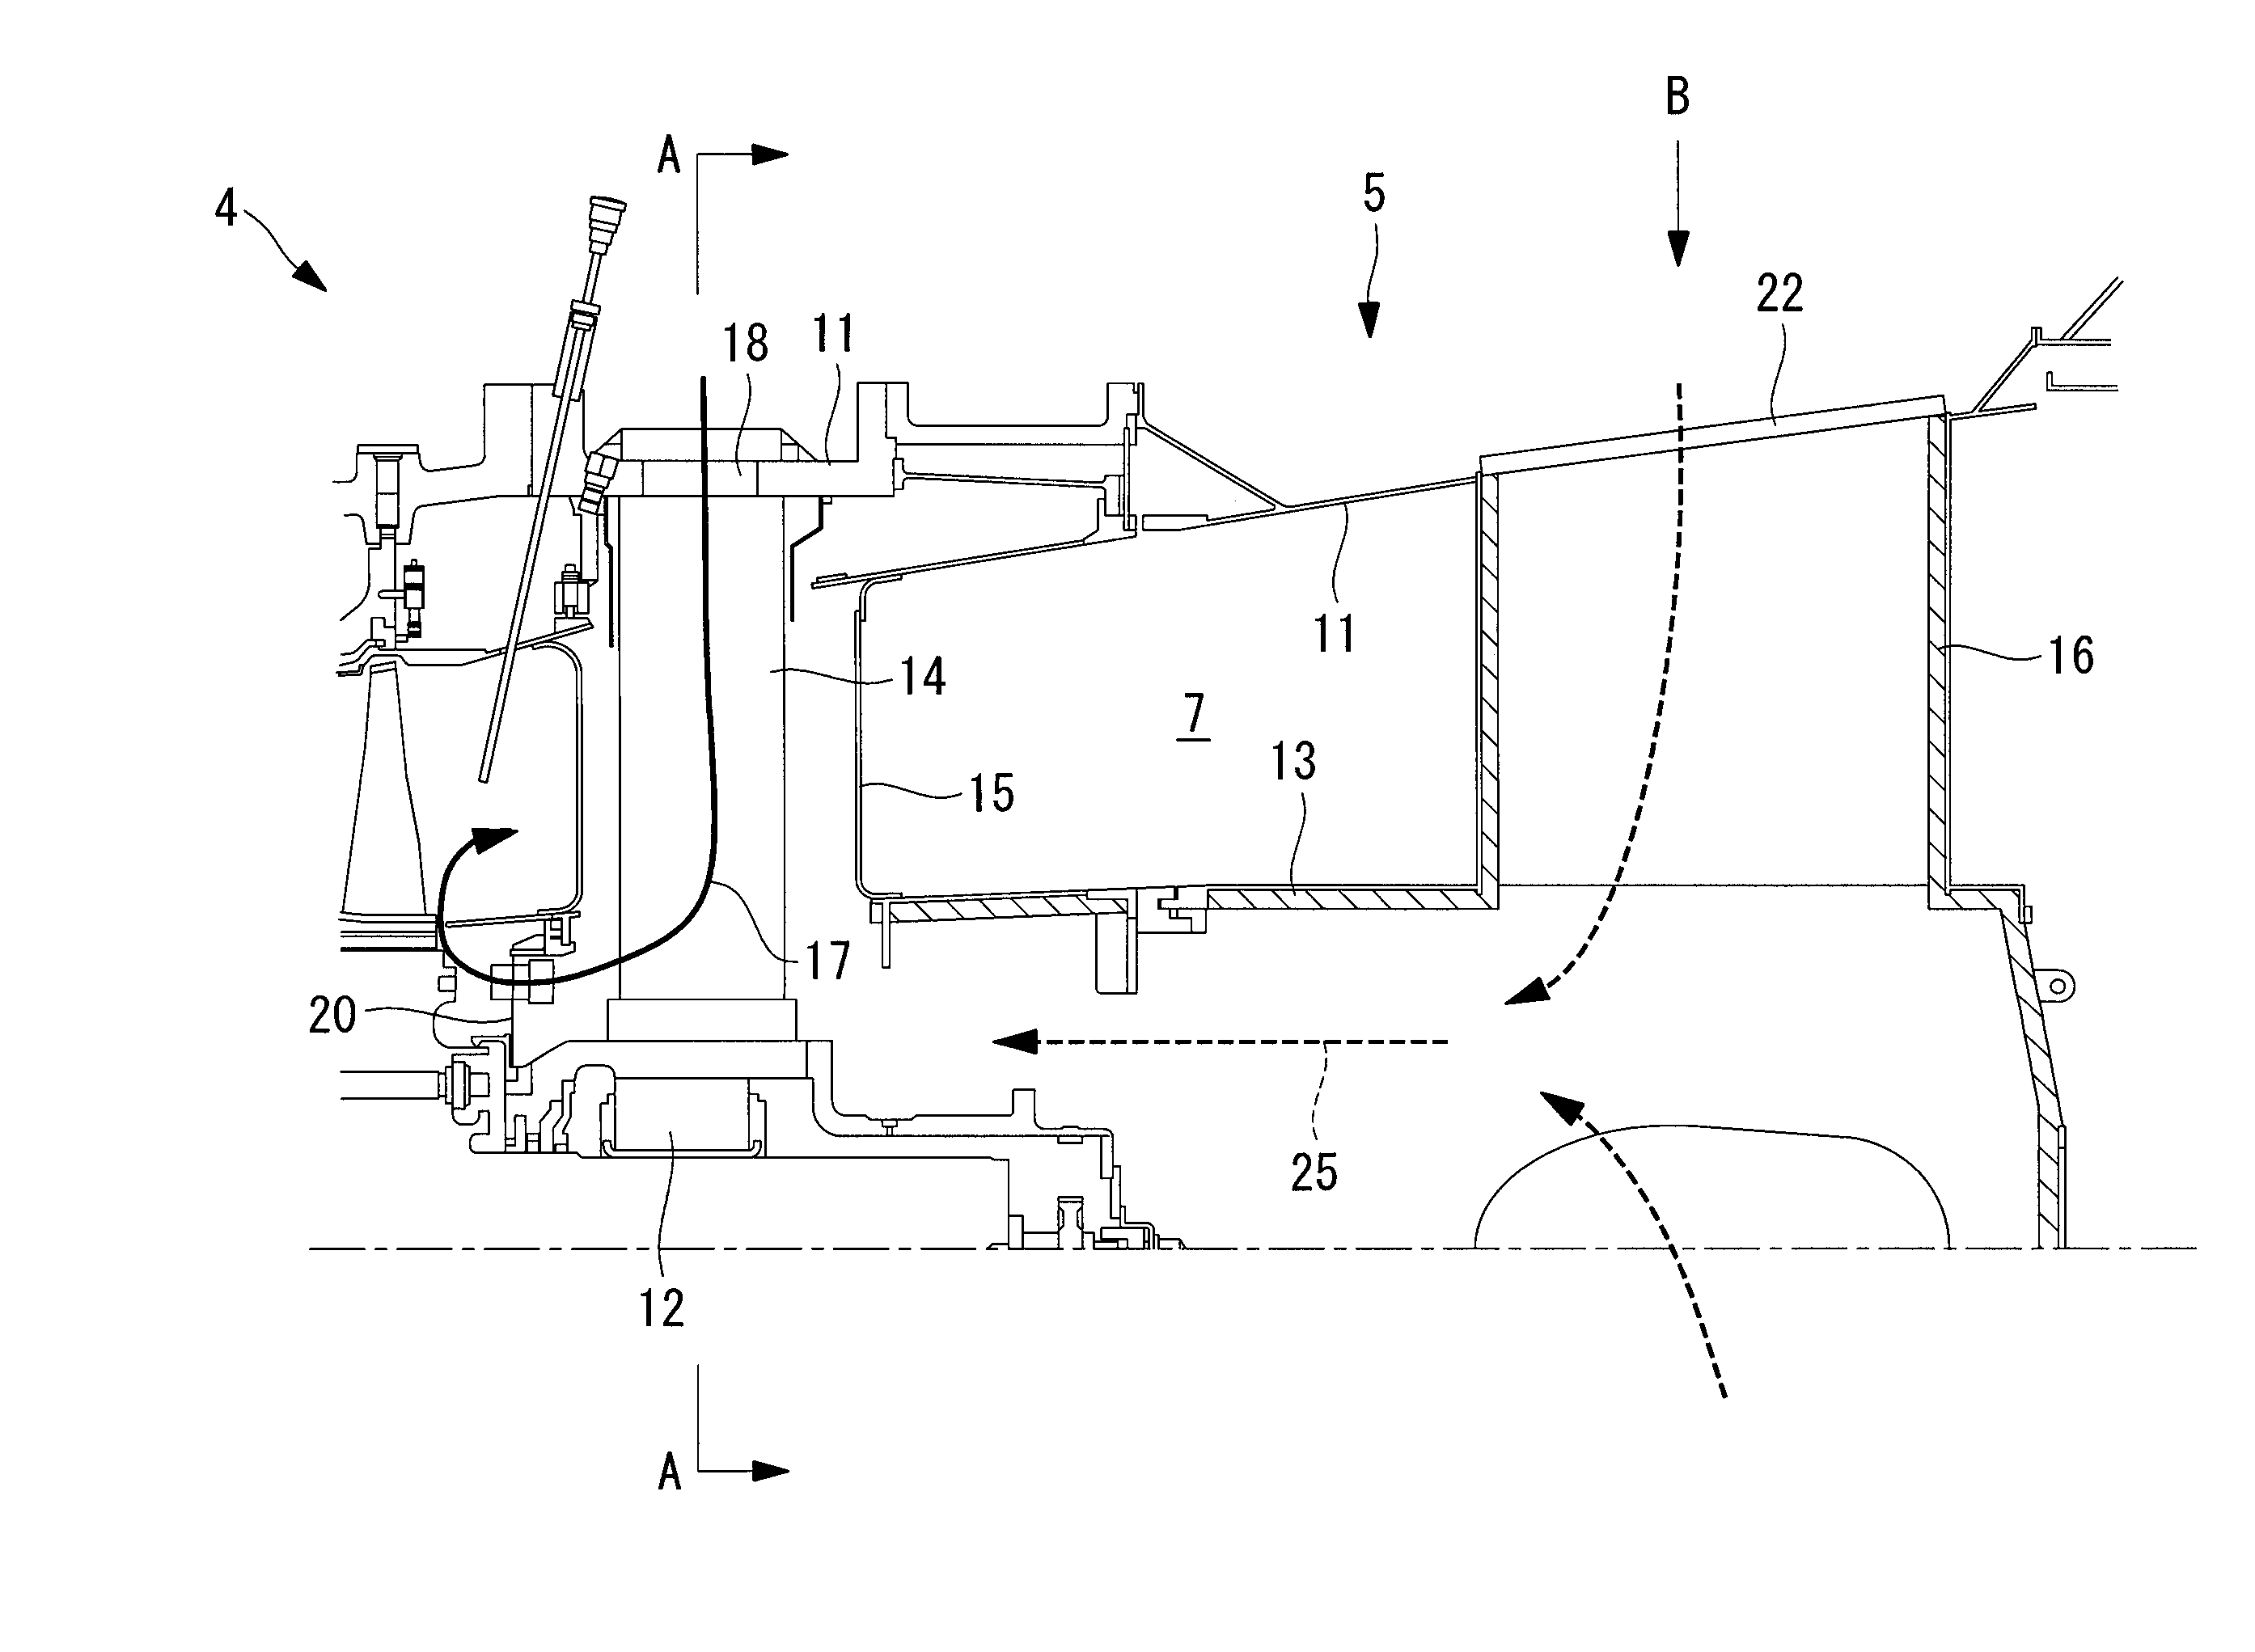 Structure of exhaust section of gas turbine and gas turbine